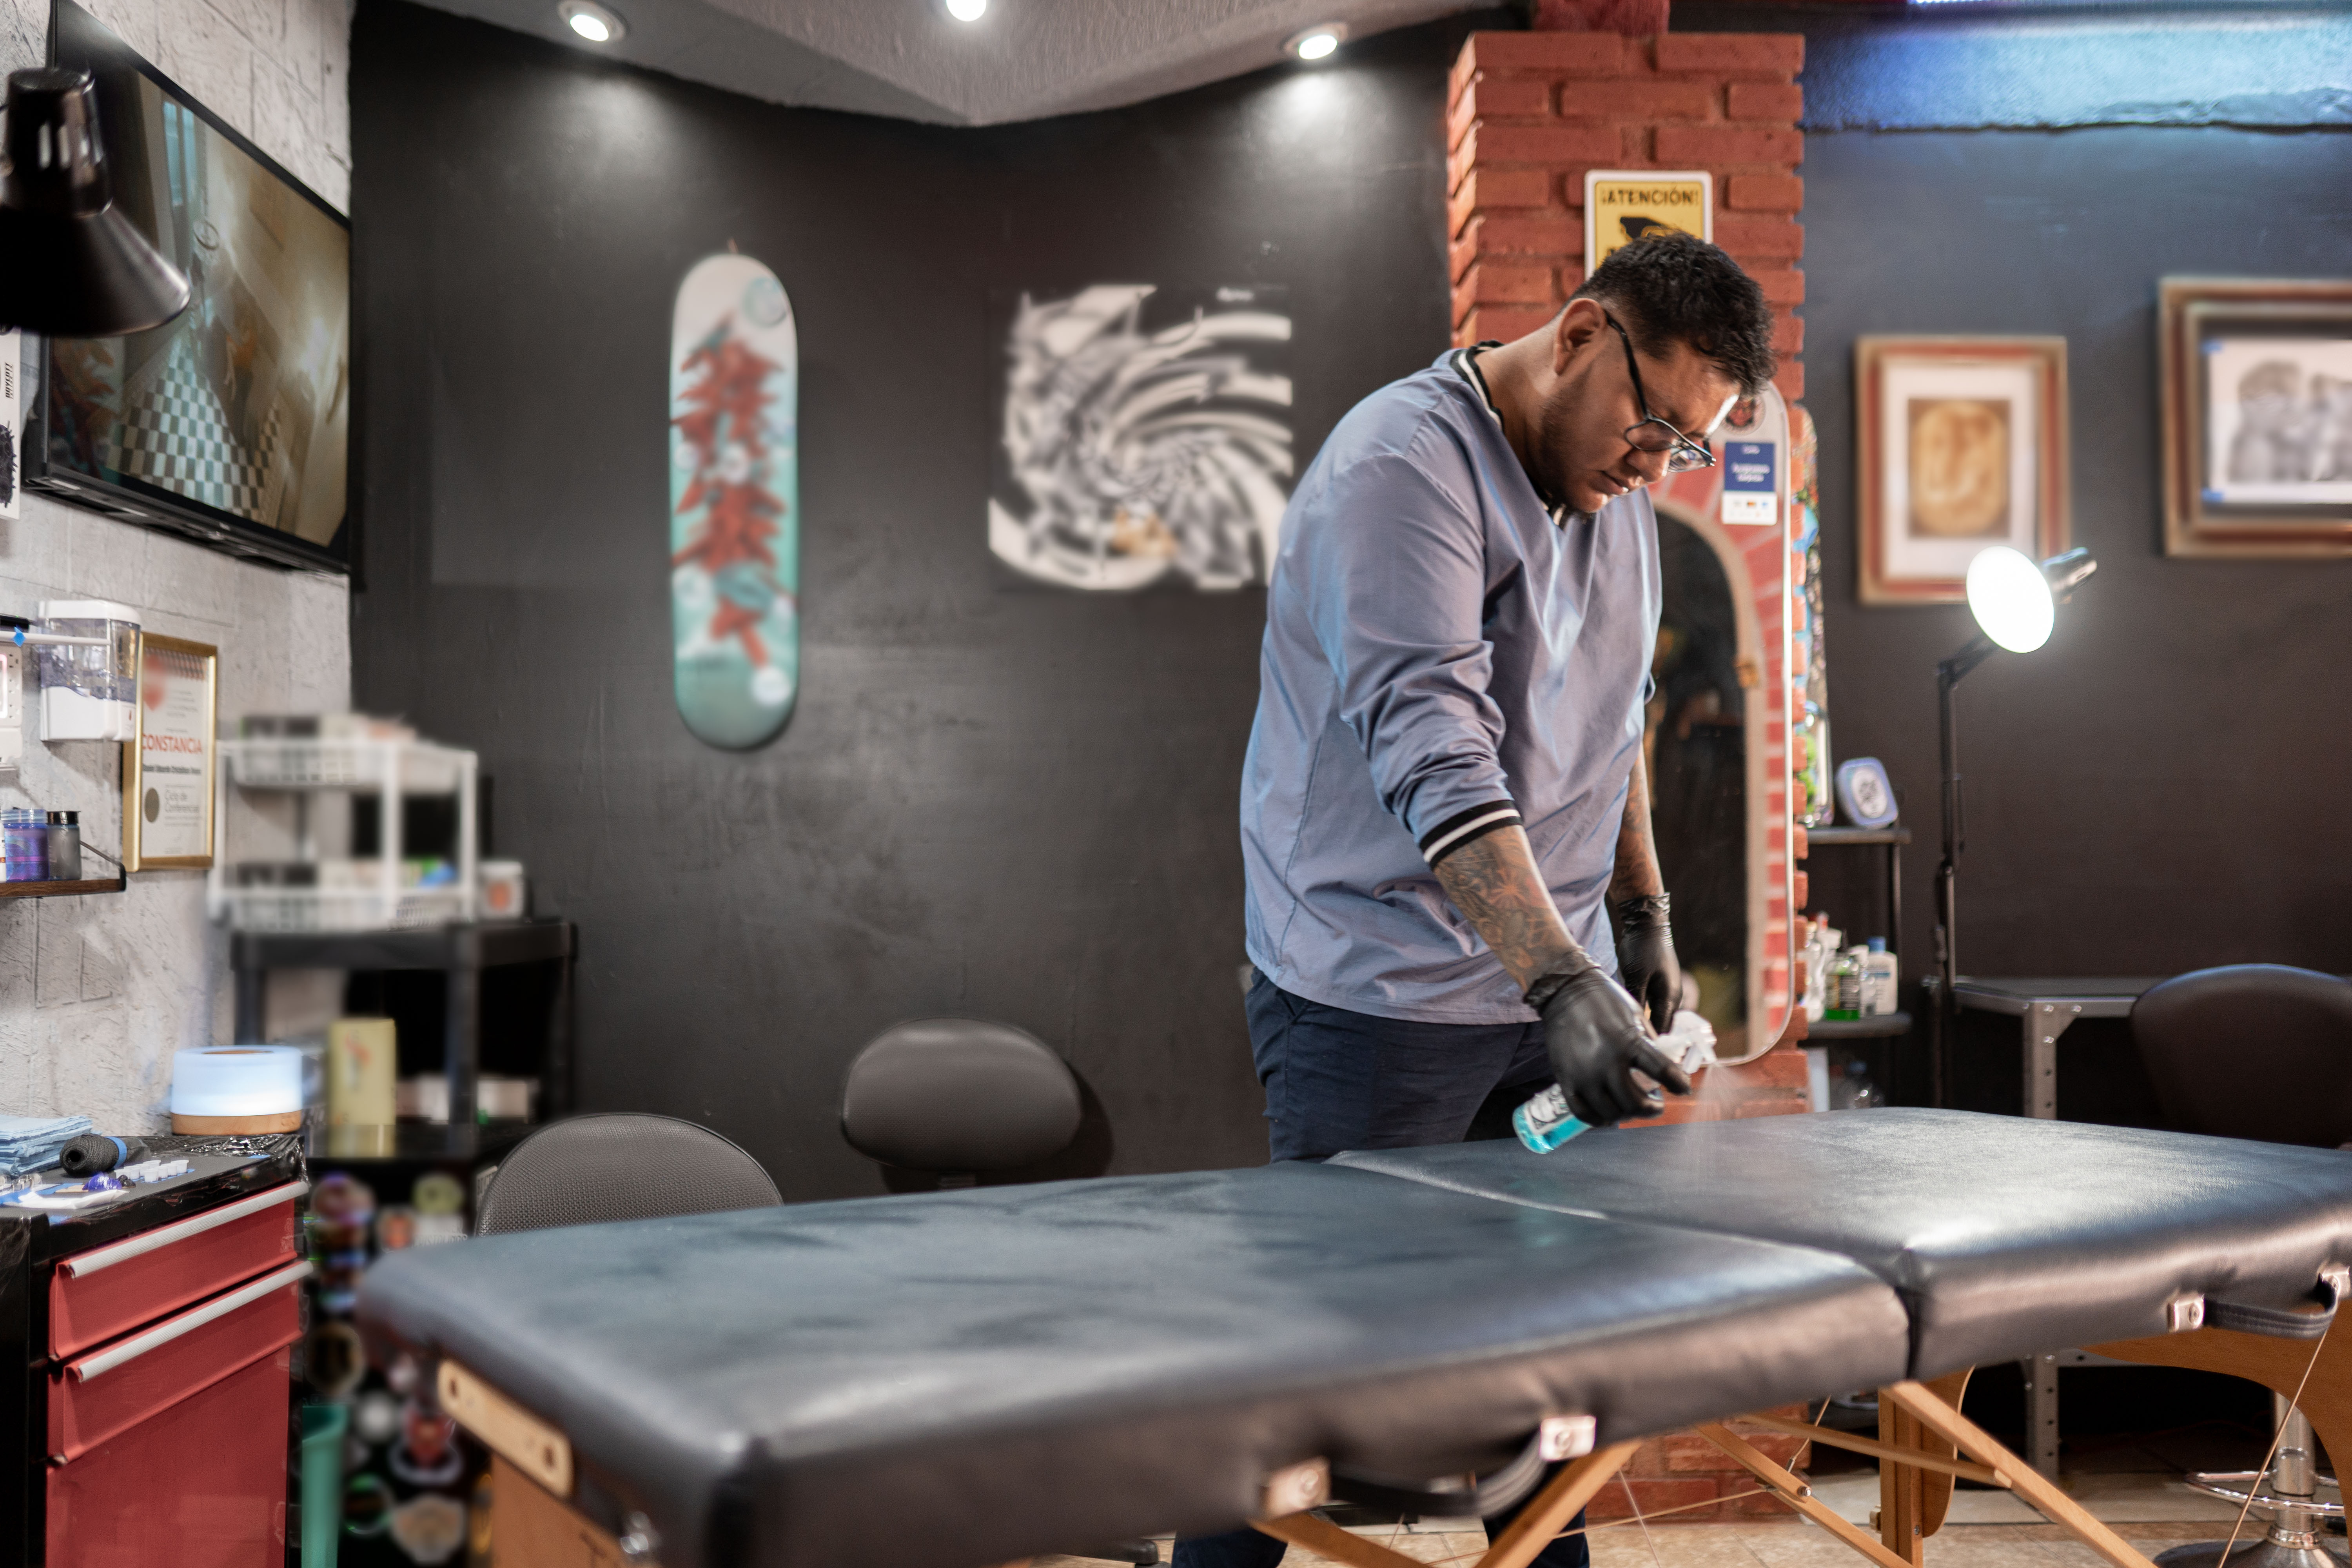 A tattoo artist cleaning the studio stretcher with a spray